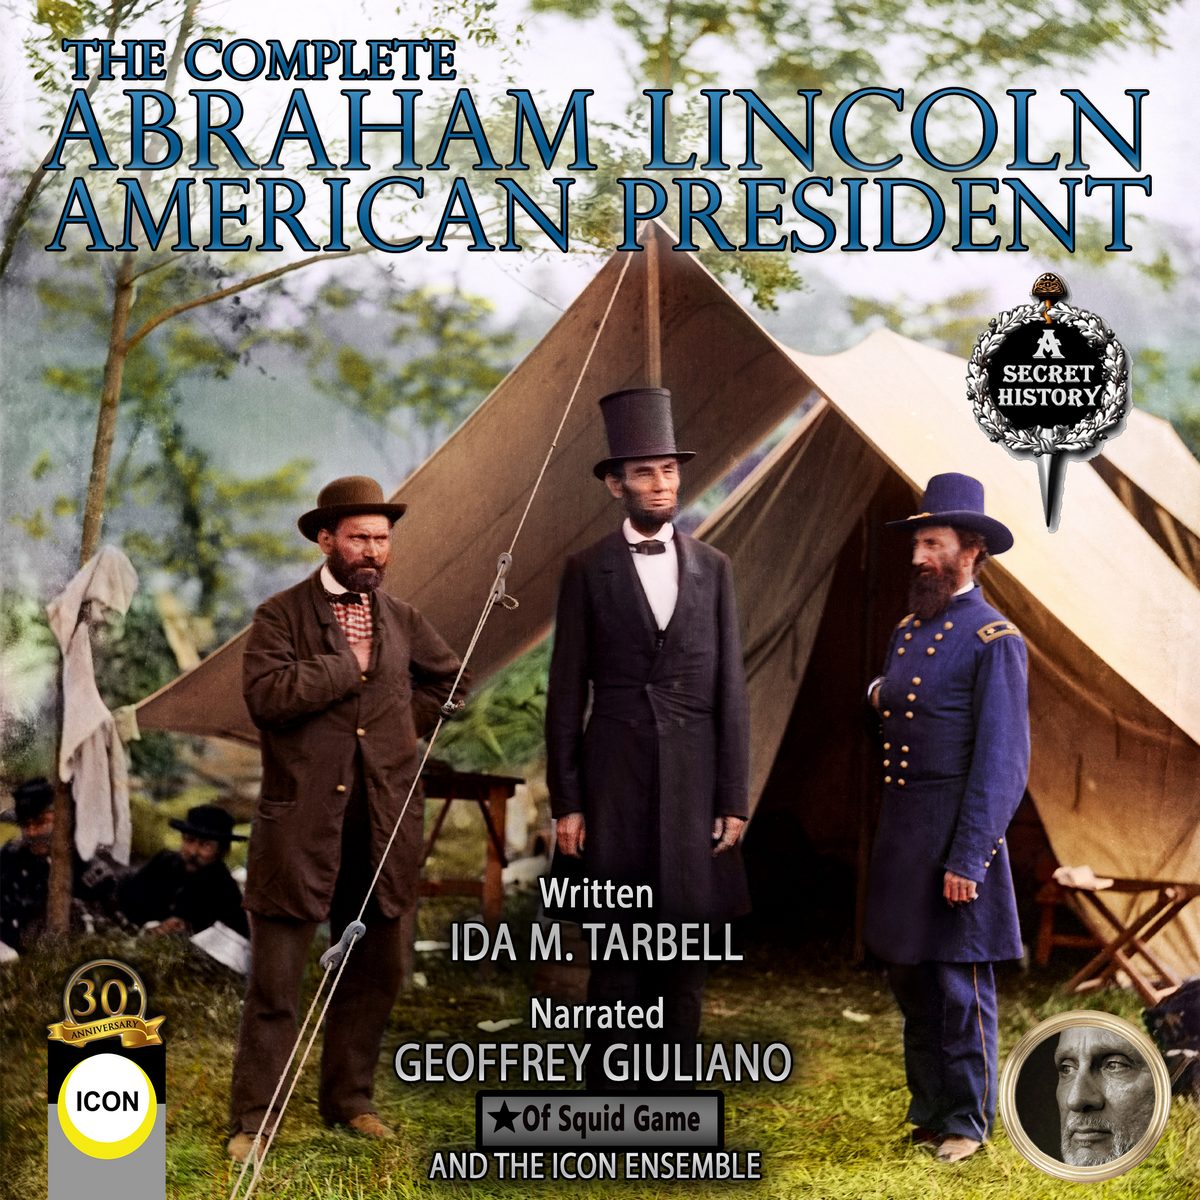 The Complete Abraham Lincoln American President